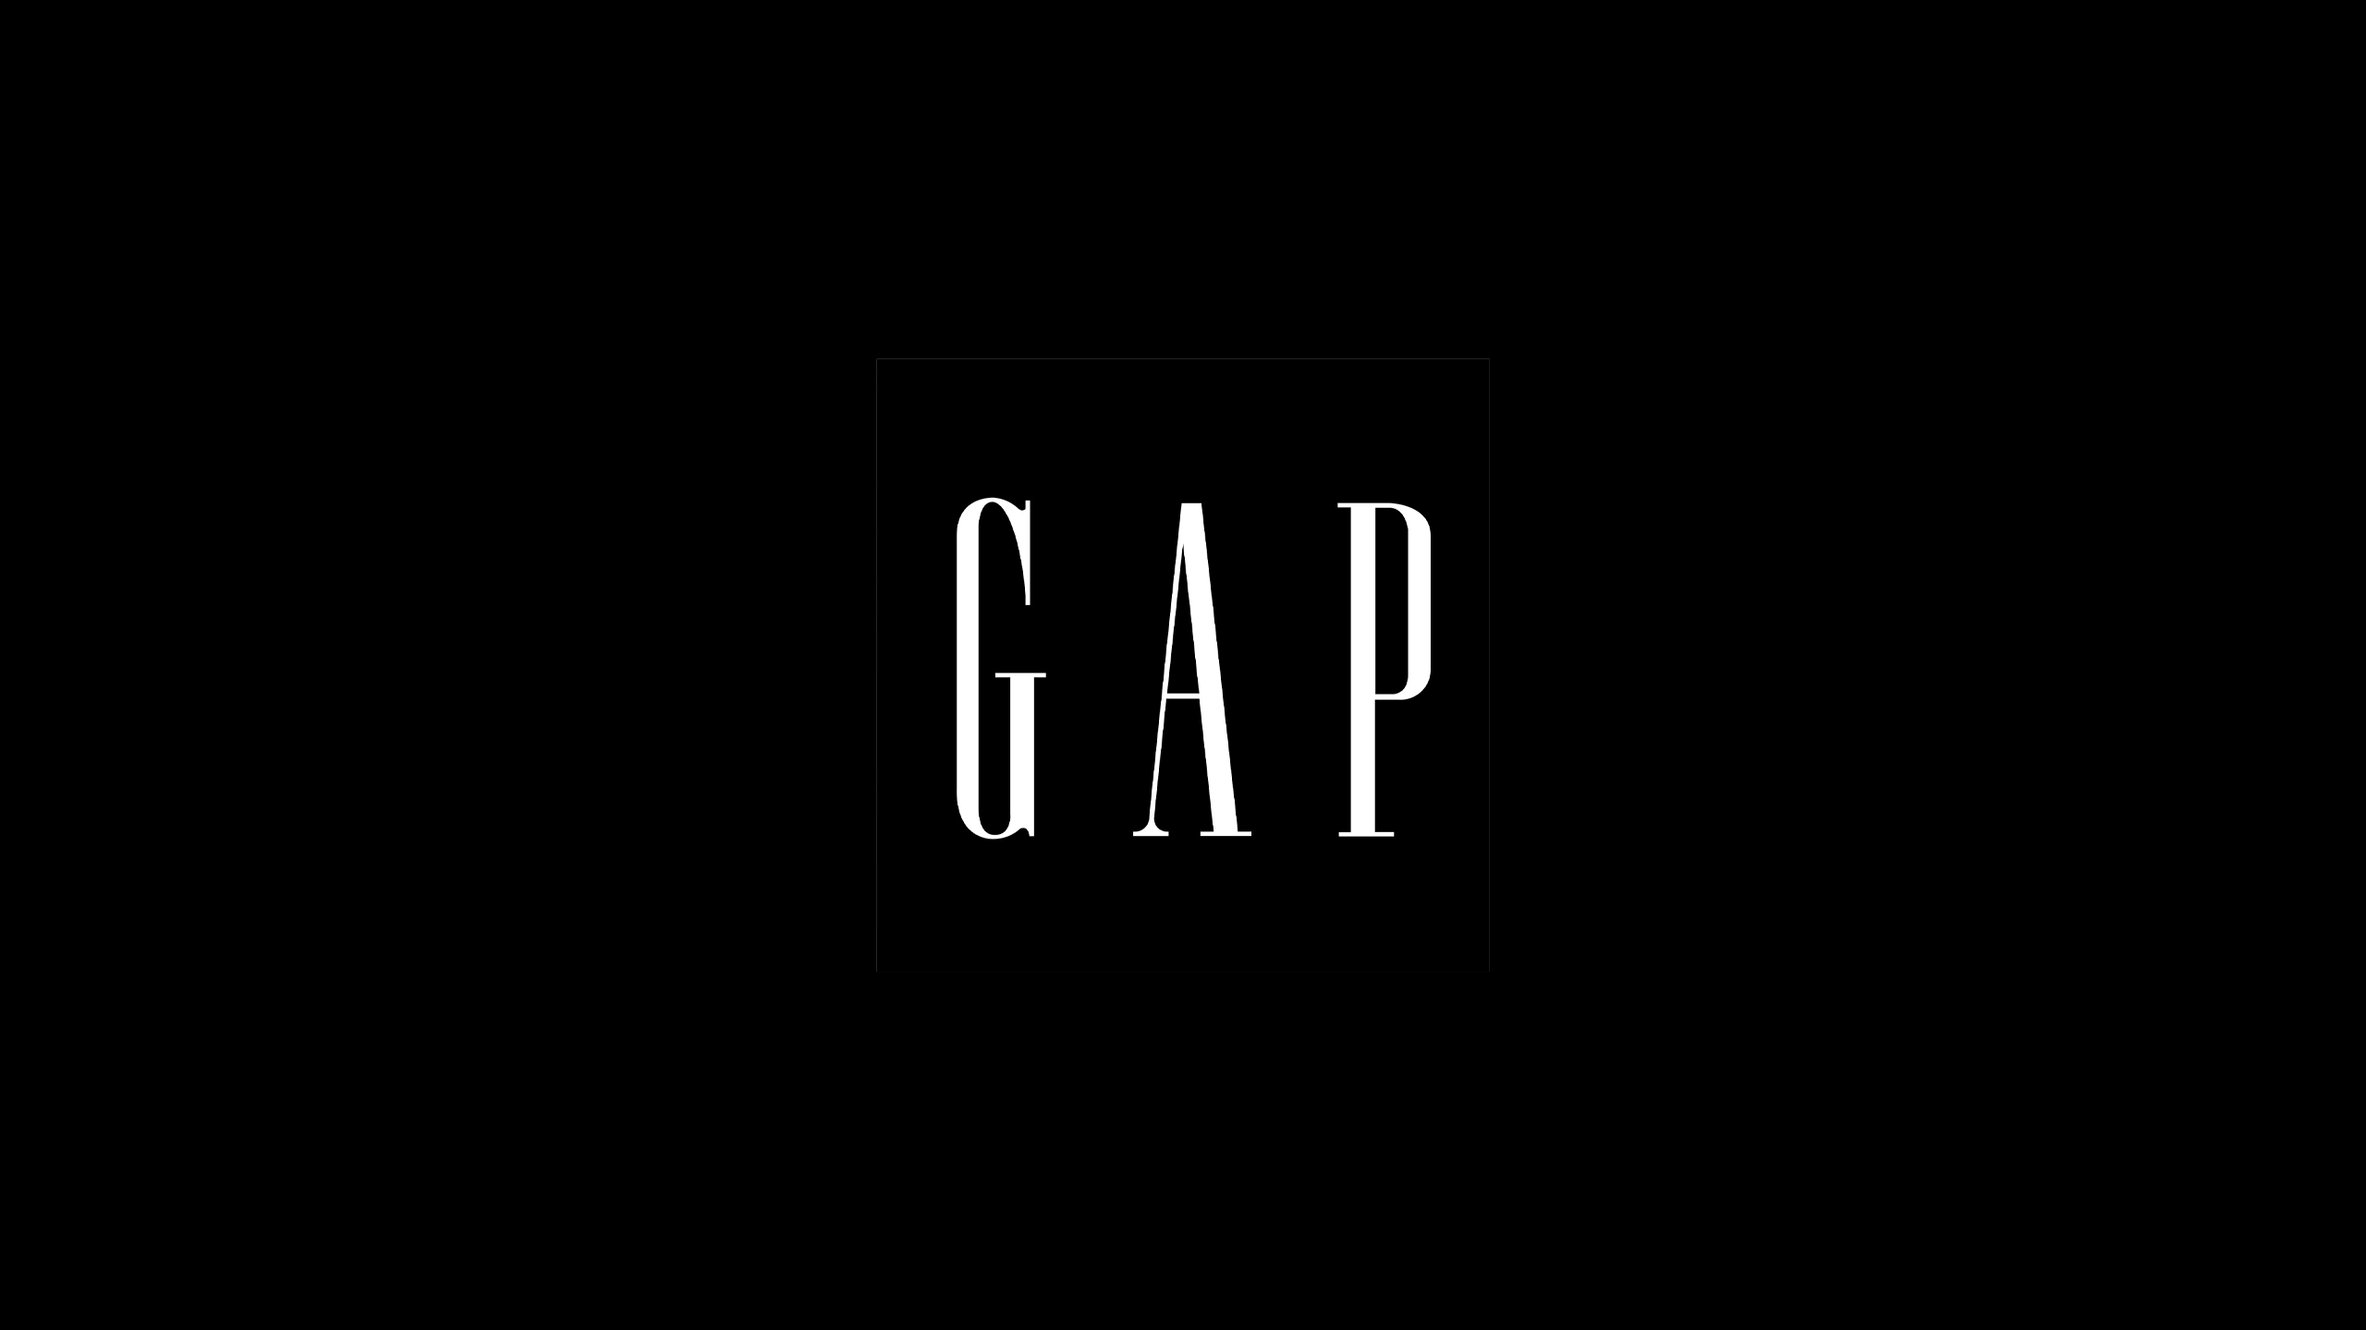 GAP Holiday 2019 Ad campaign Is Casting Real Families in New York City